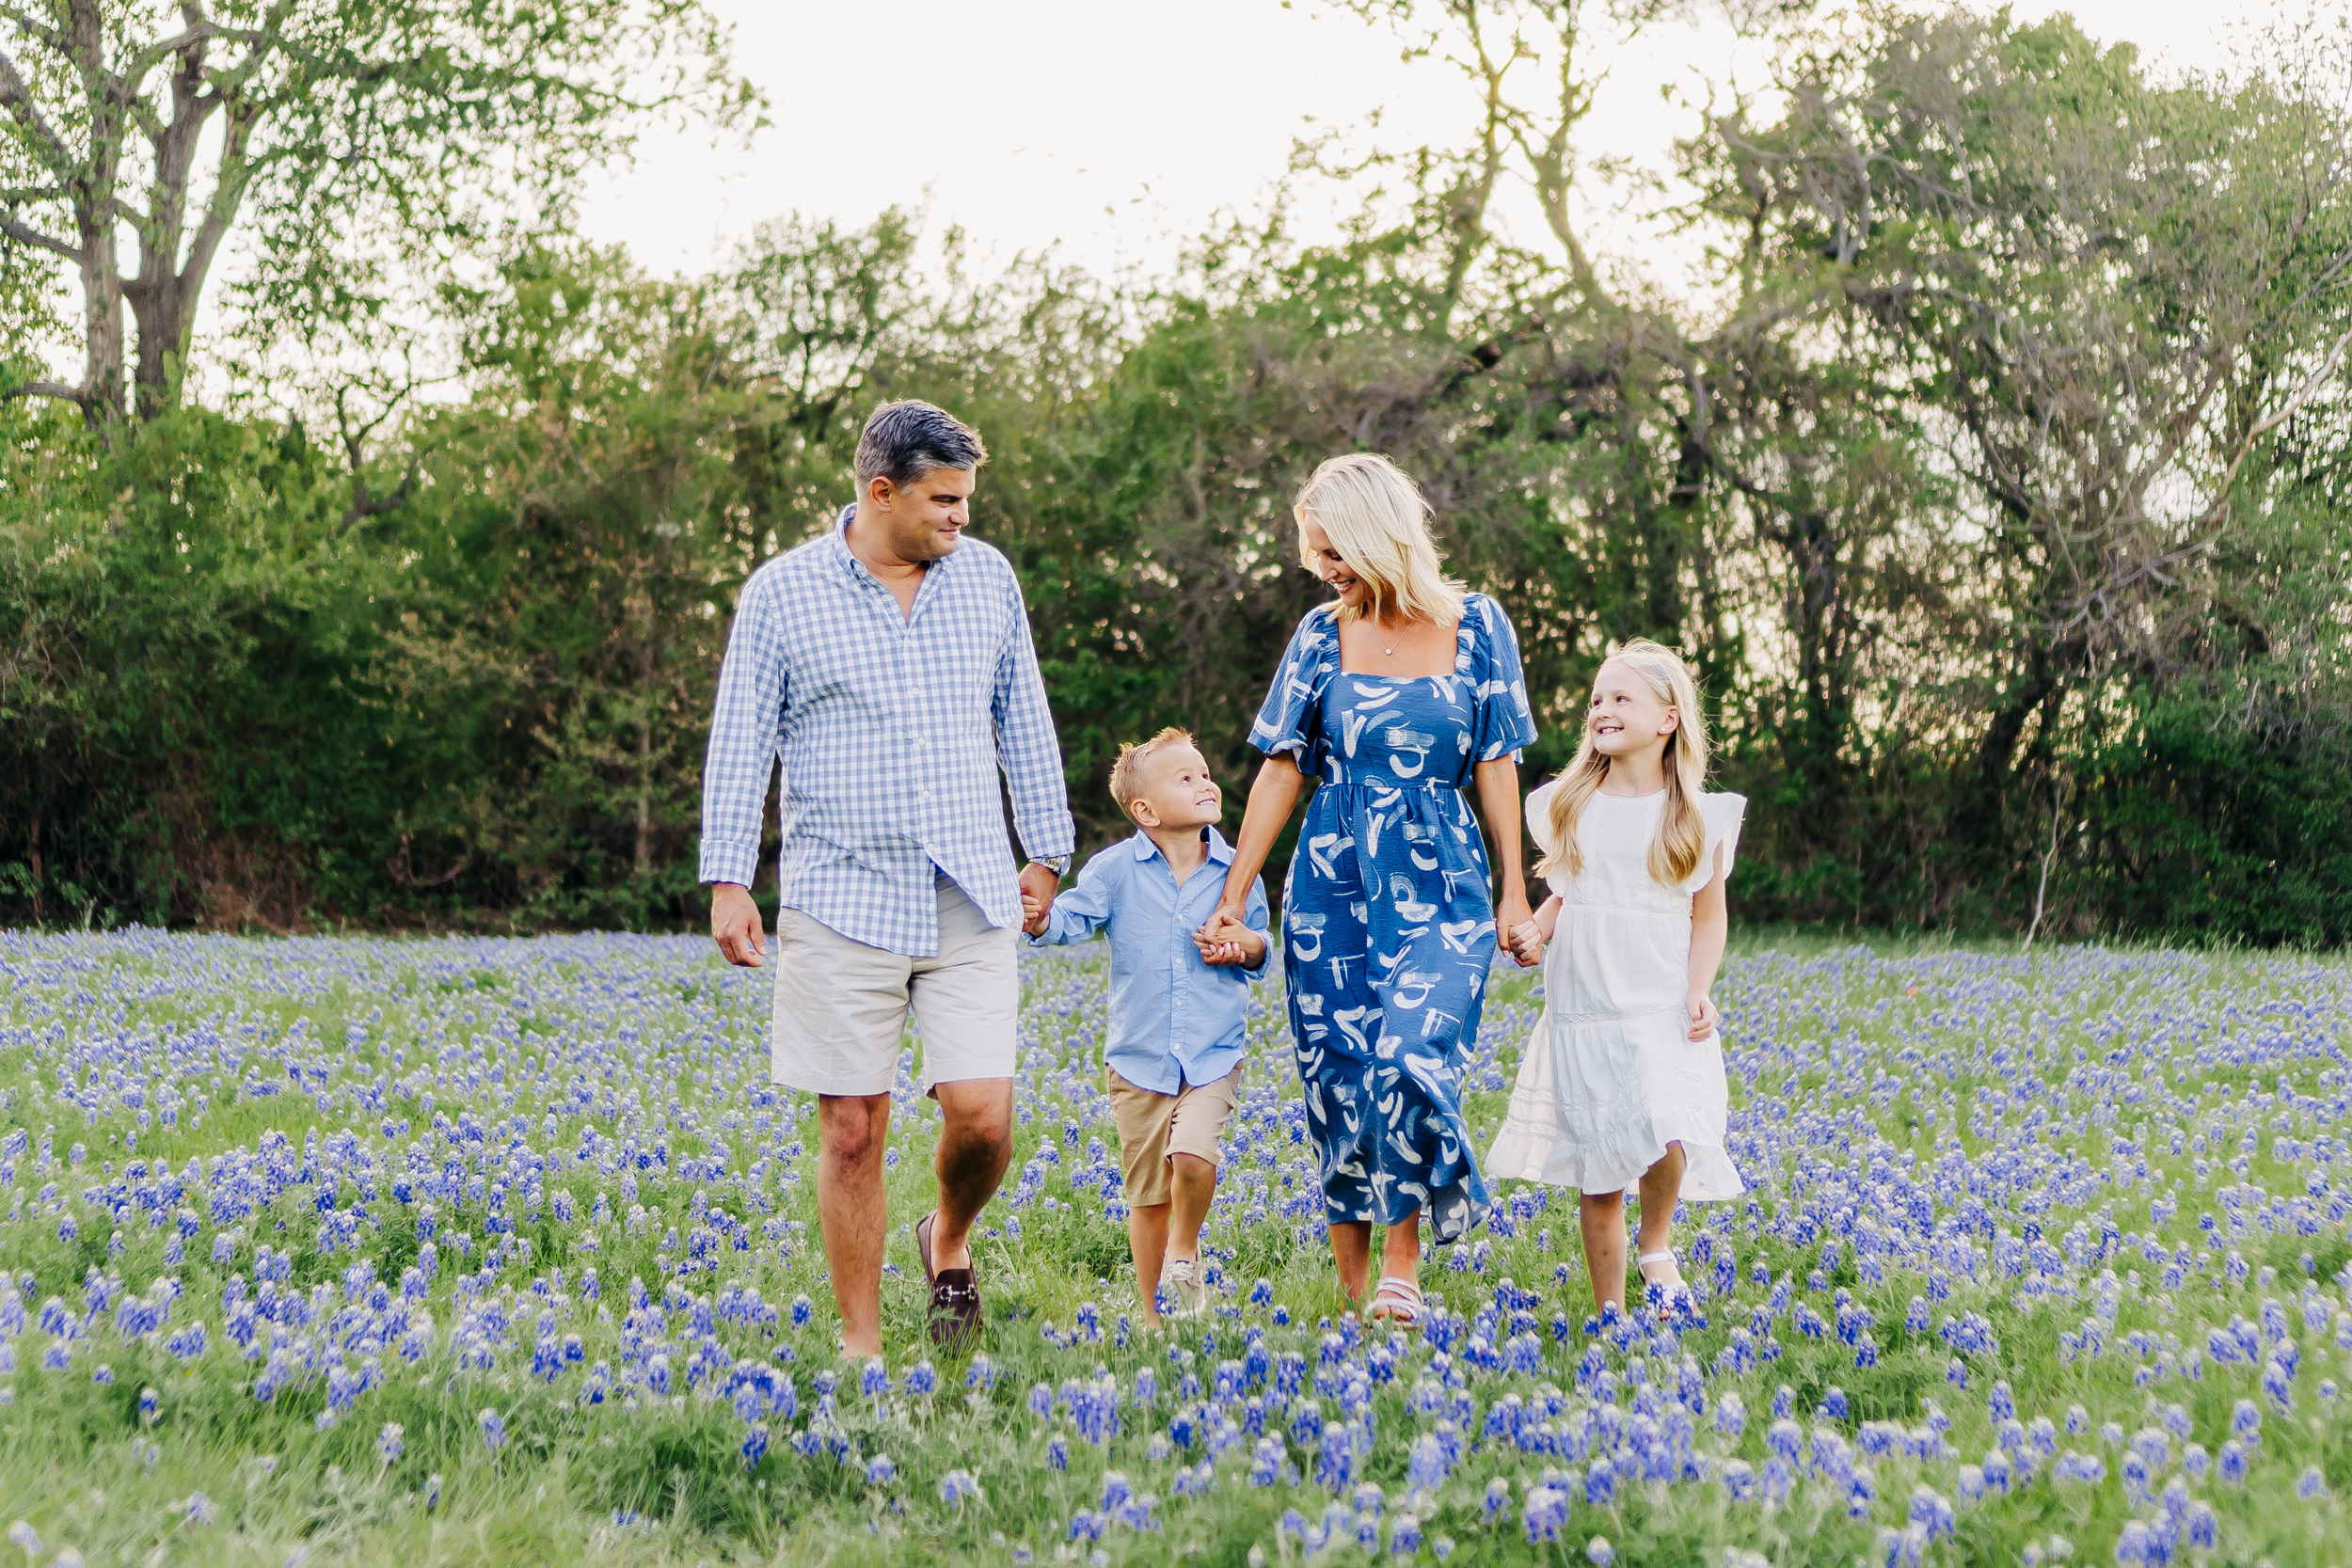 Bluebonnet mini sessions
How to get your child to behave for photos | Plano, Texas Family Photographer | via brittnierenee.com